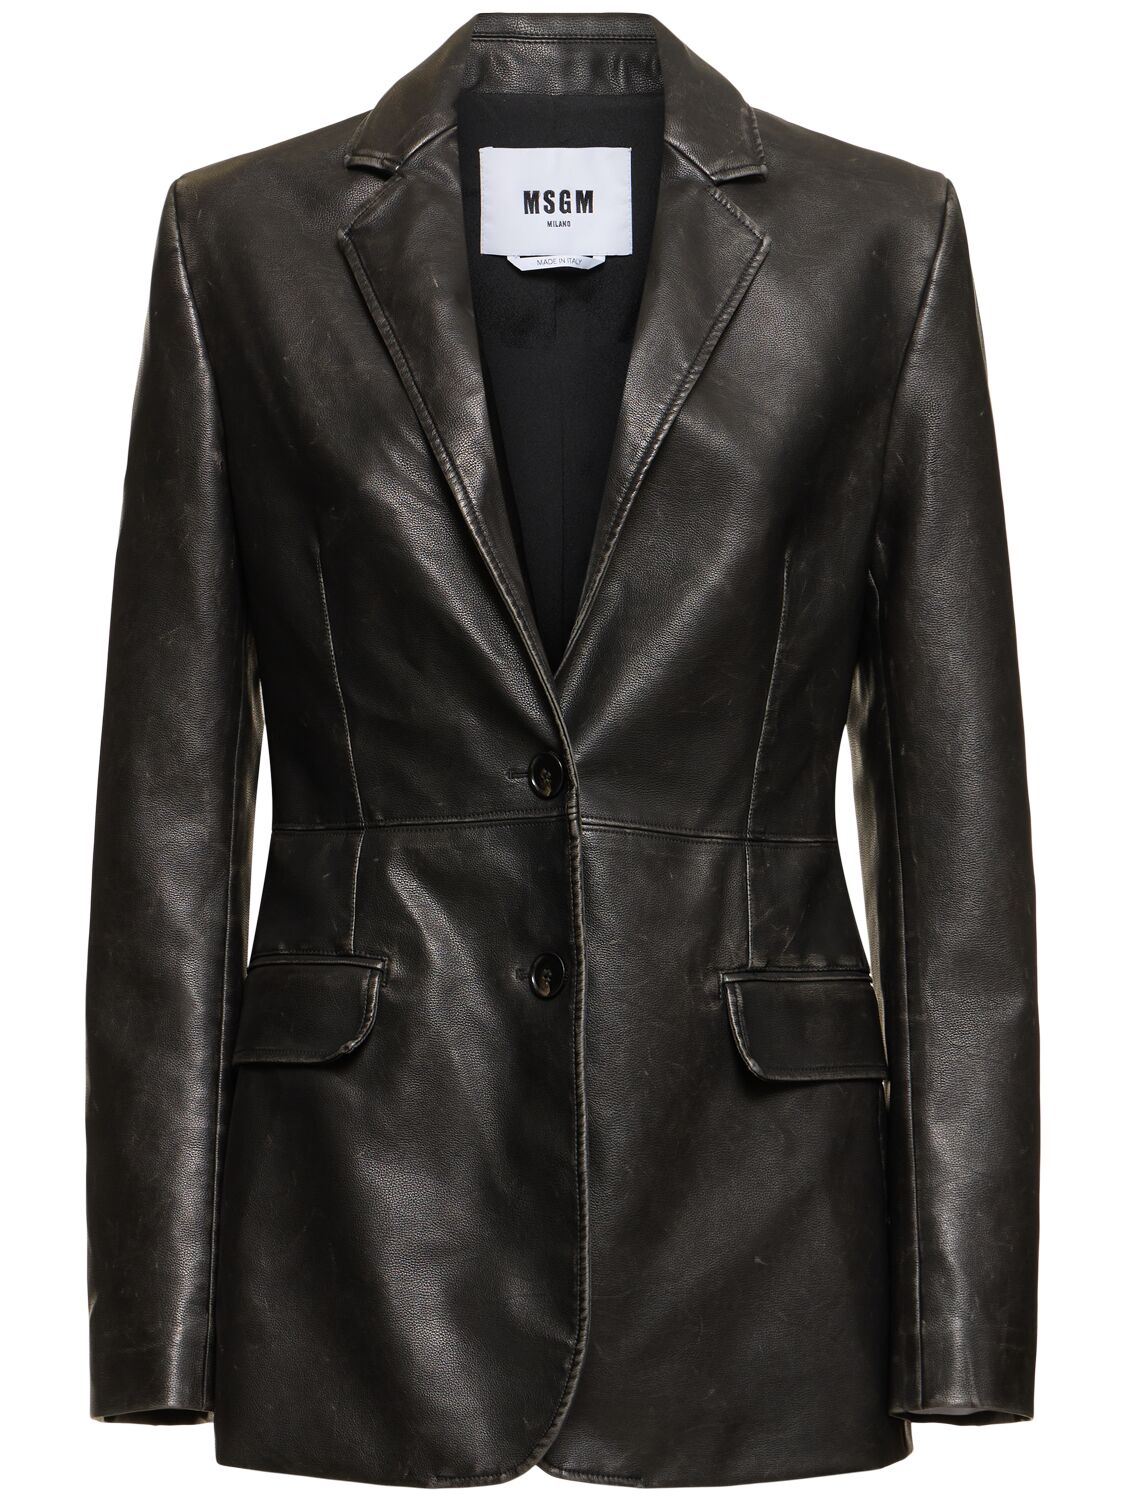 Msgm Faux Leather Jacket In Black